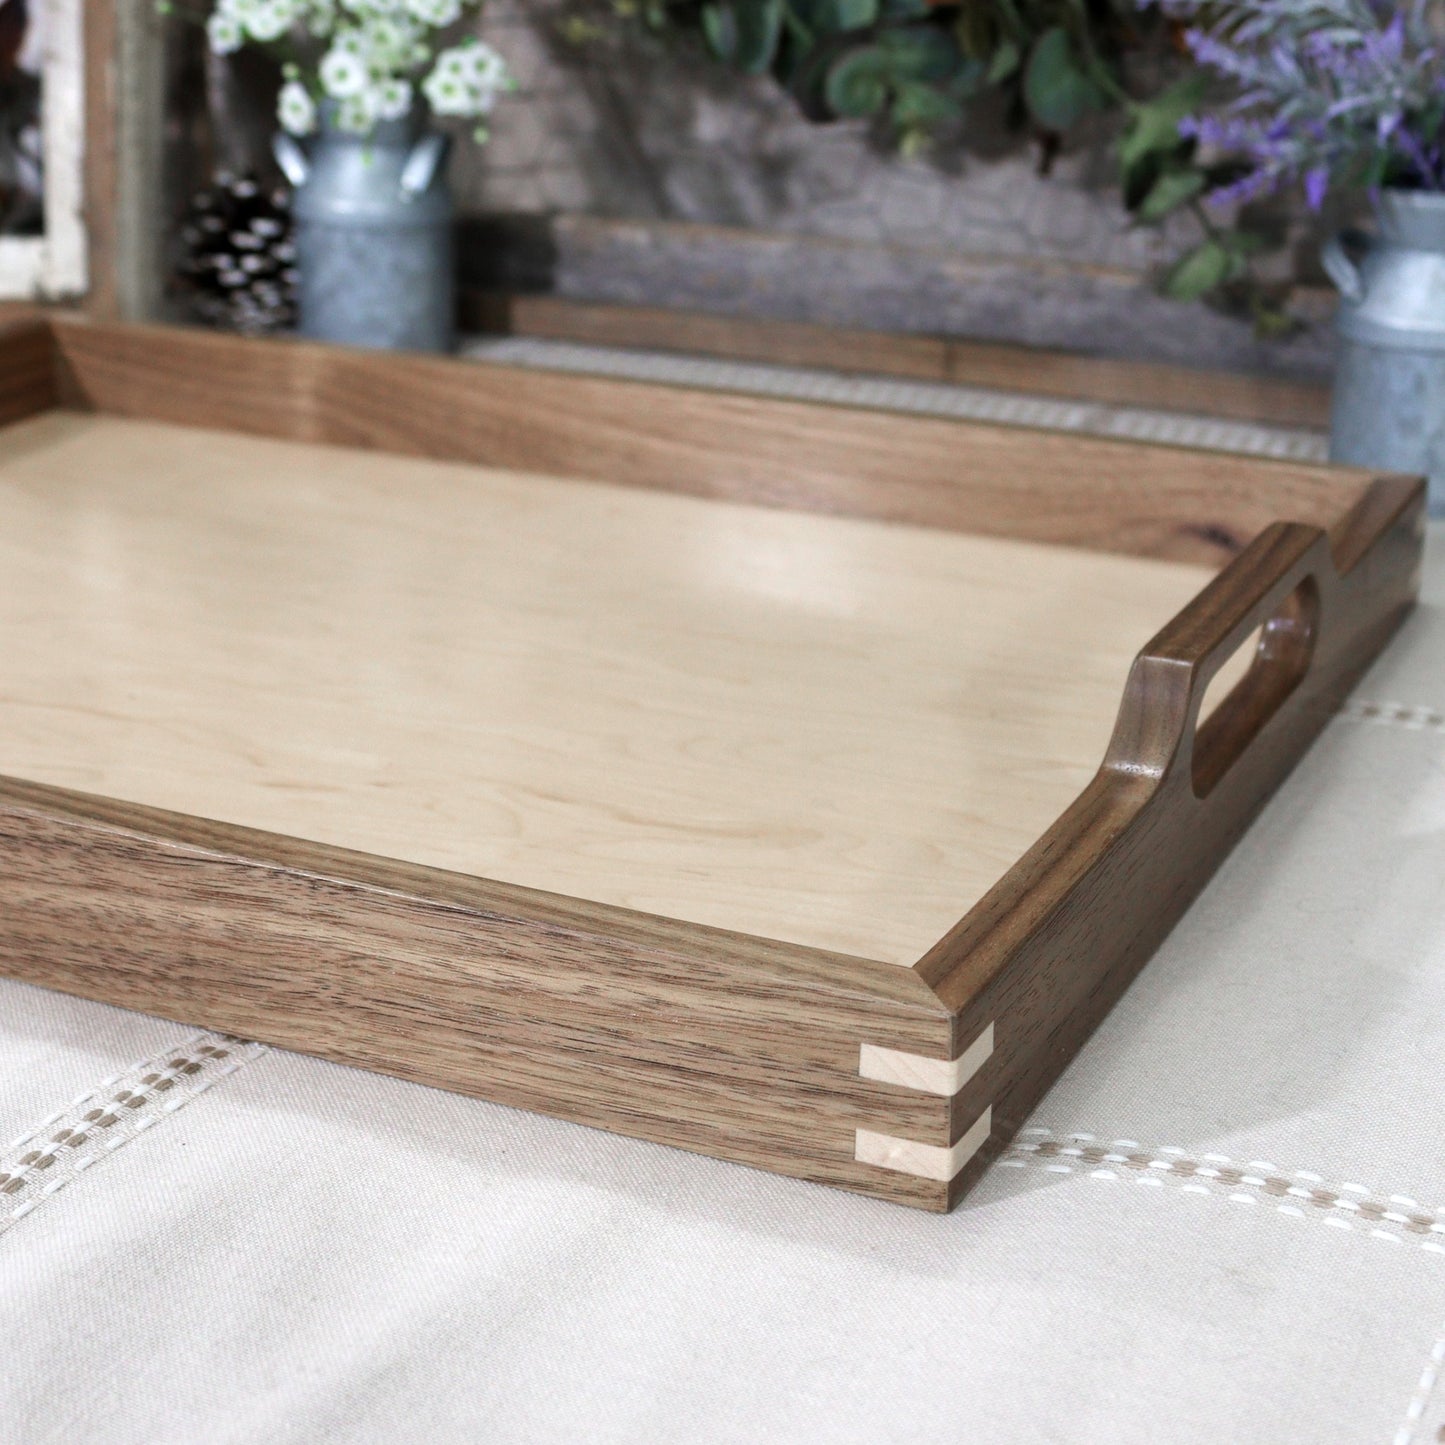 2-Piece Serving Set: Walnut & Maple Wood Matching Cutting Board and Serving Tray with Handle